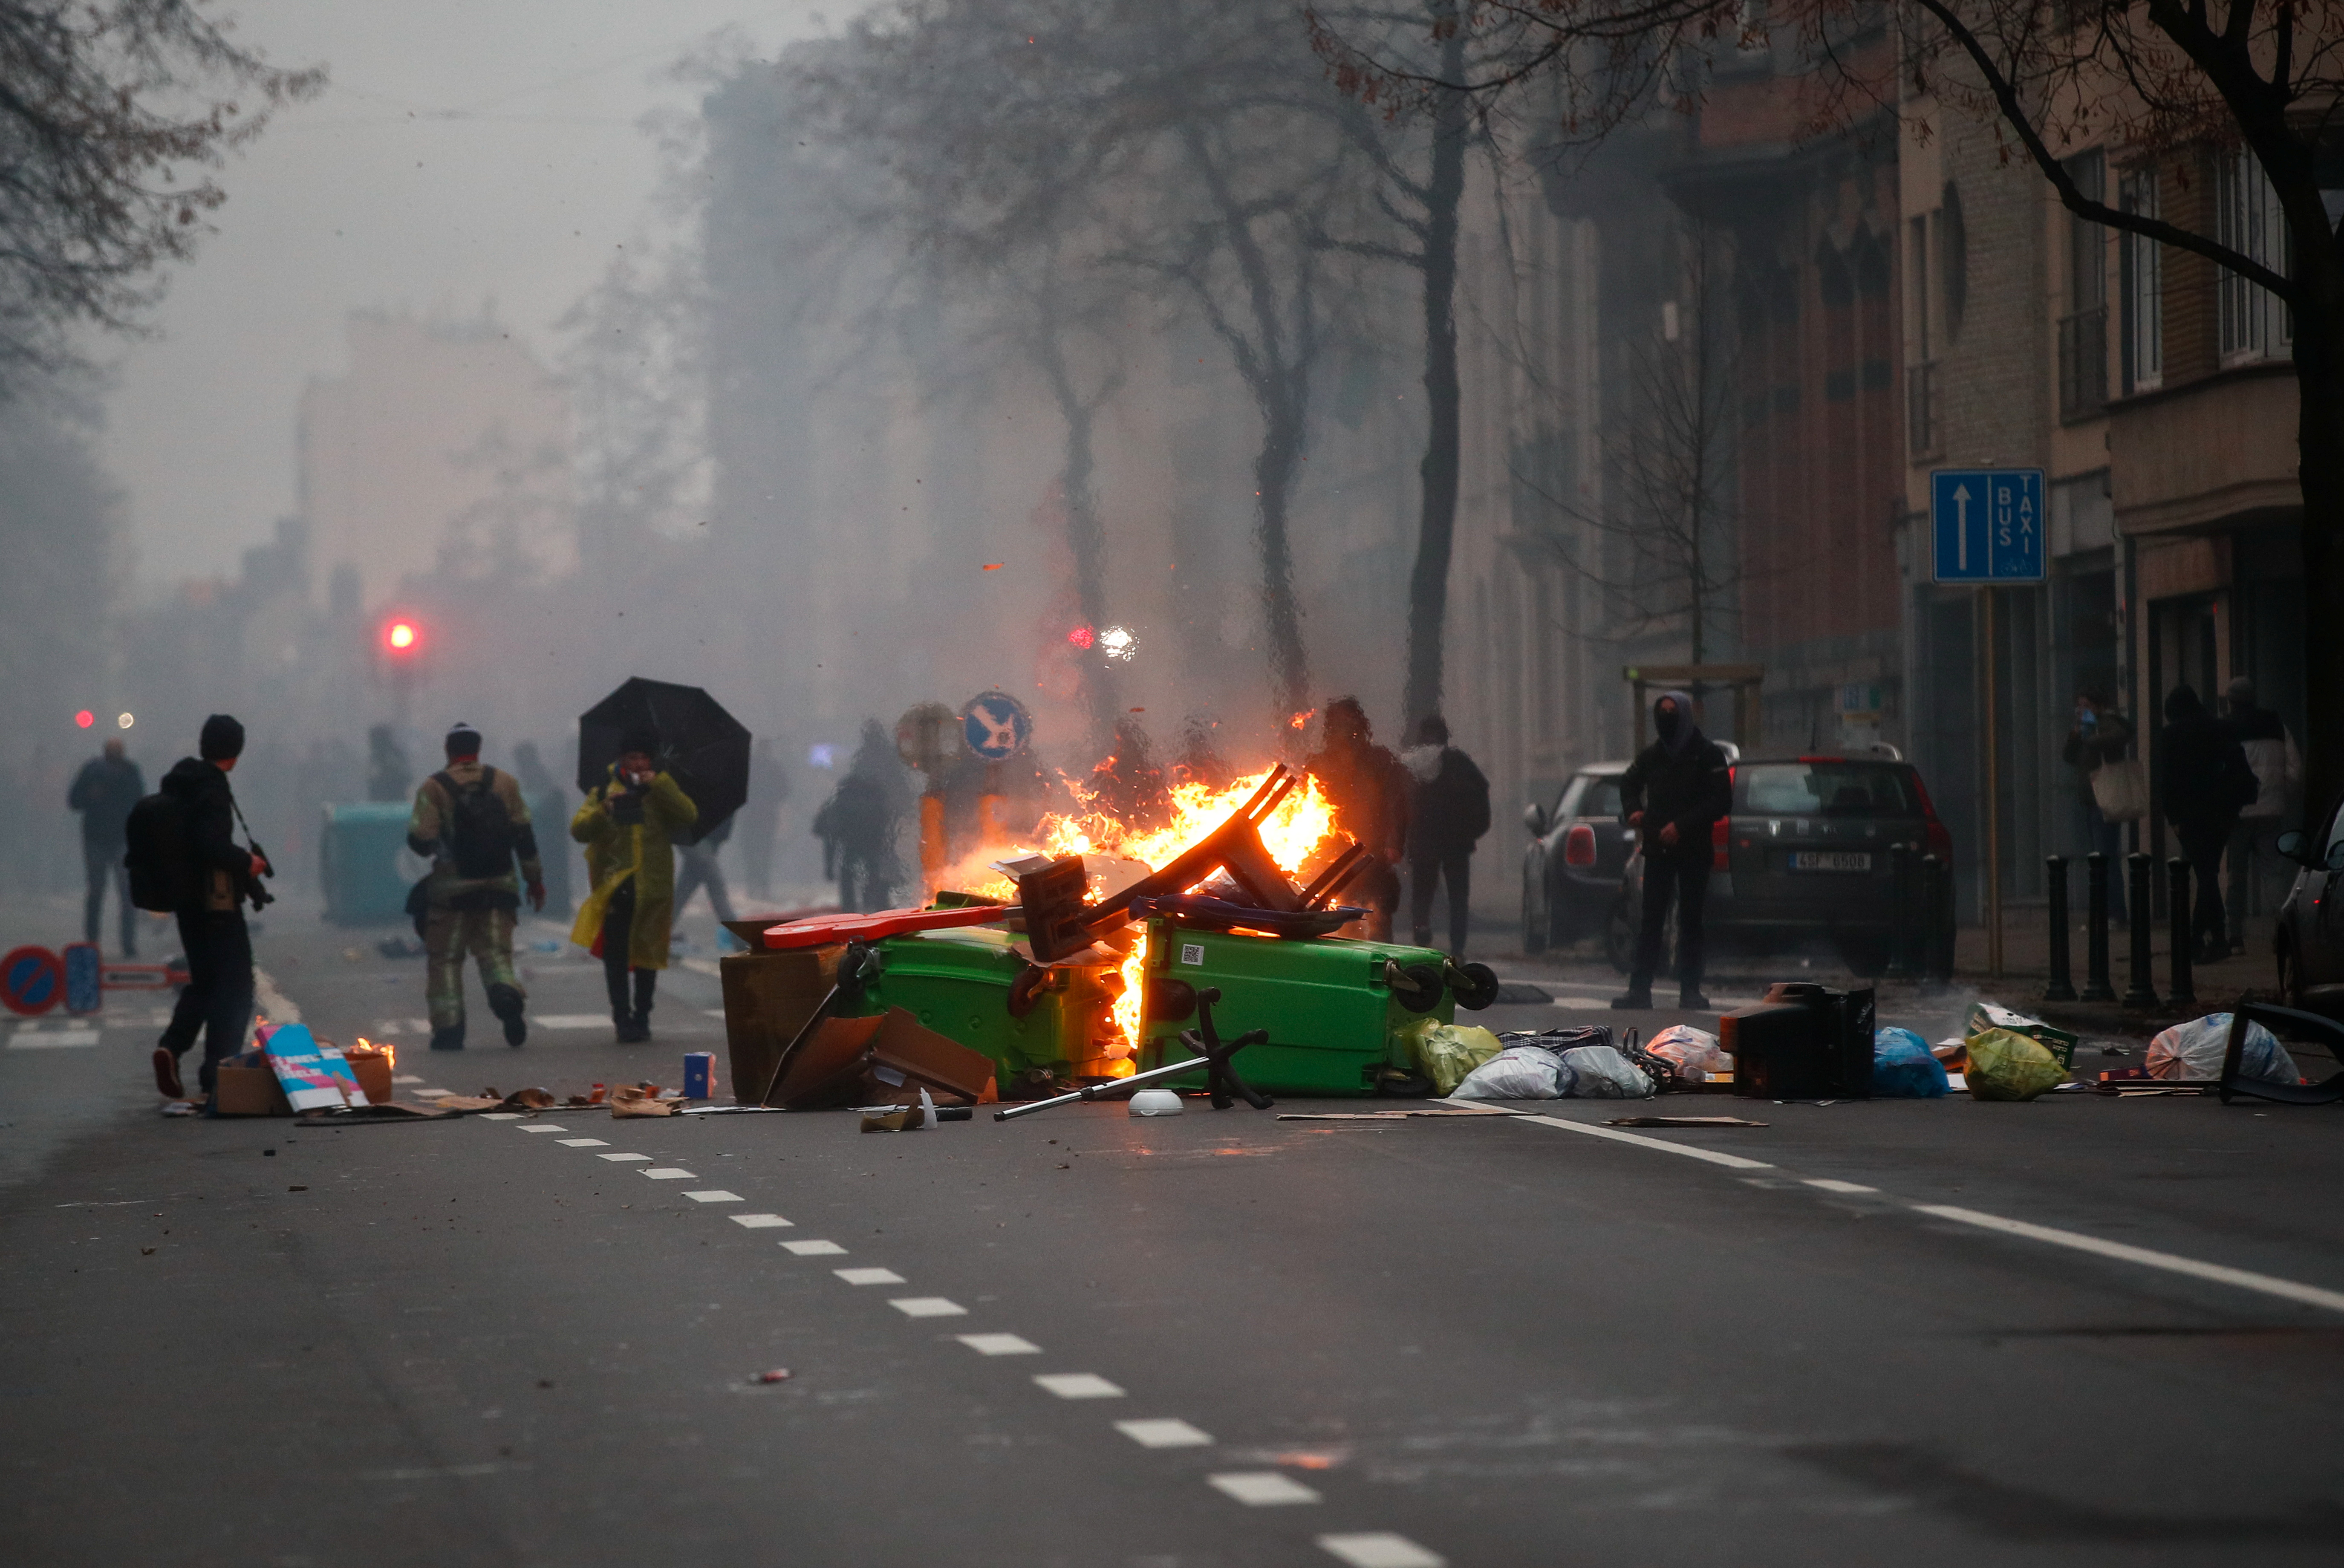 Burning objects are seen on the street during a protest against the Belgian government's restrictions imposed to contain the spread of the coronavirus disease (COVID-19), in Brussels, Belgium December 5, 2021. REUTERS/Johanna Geron